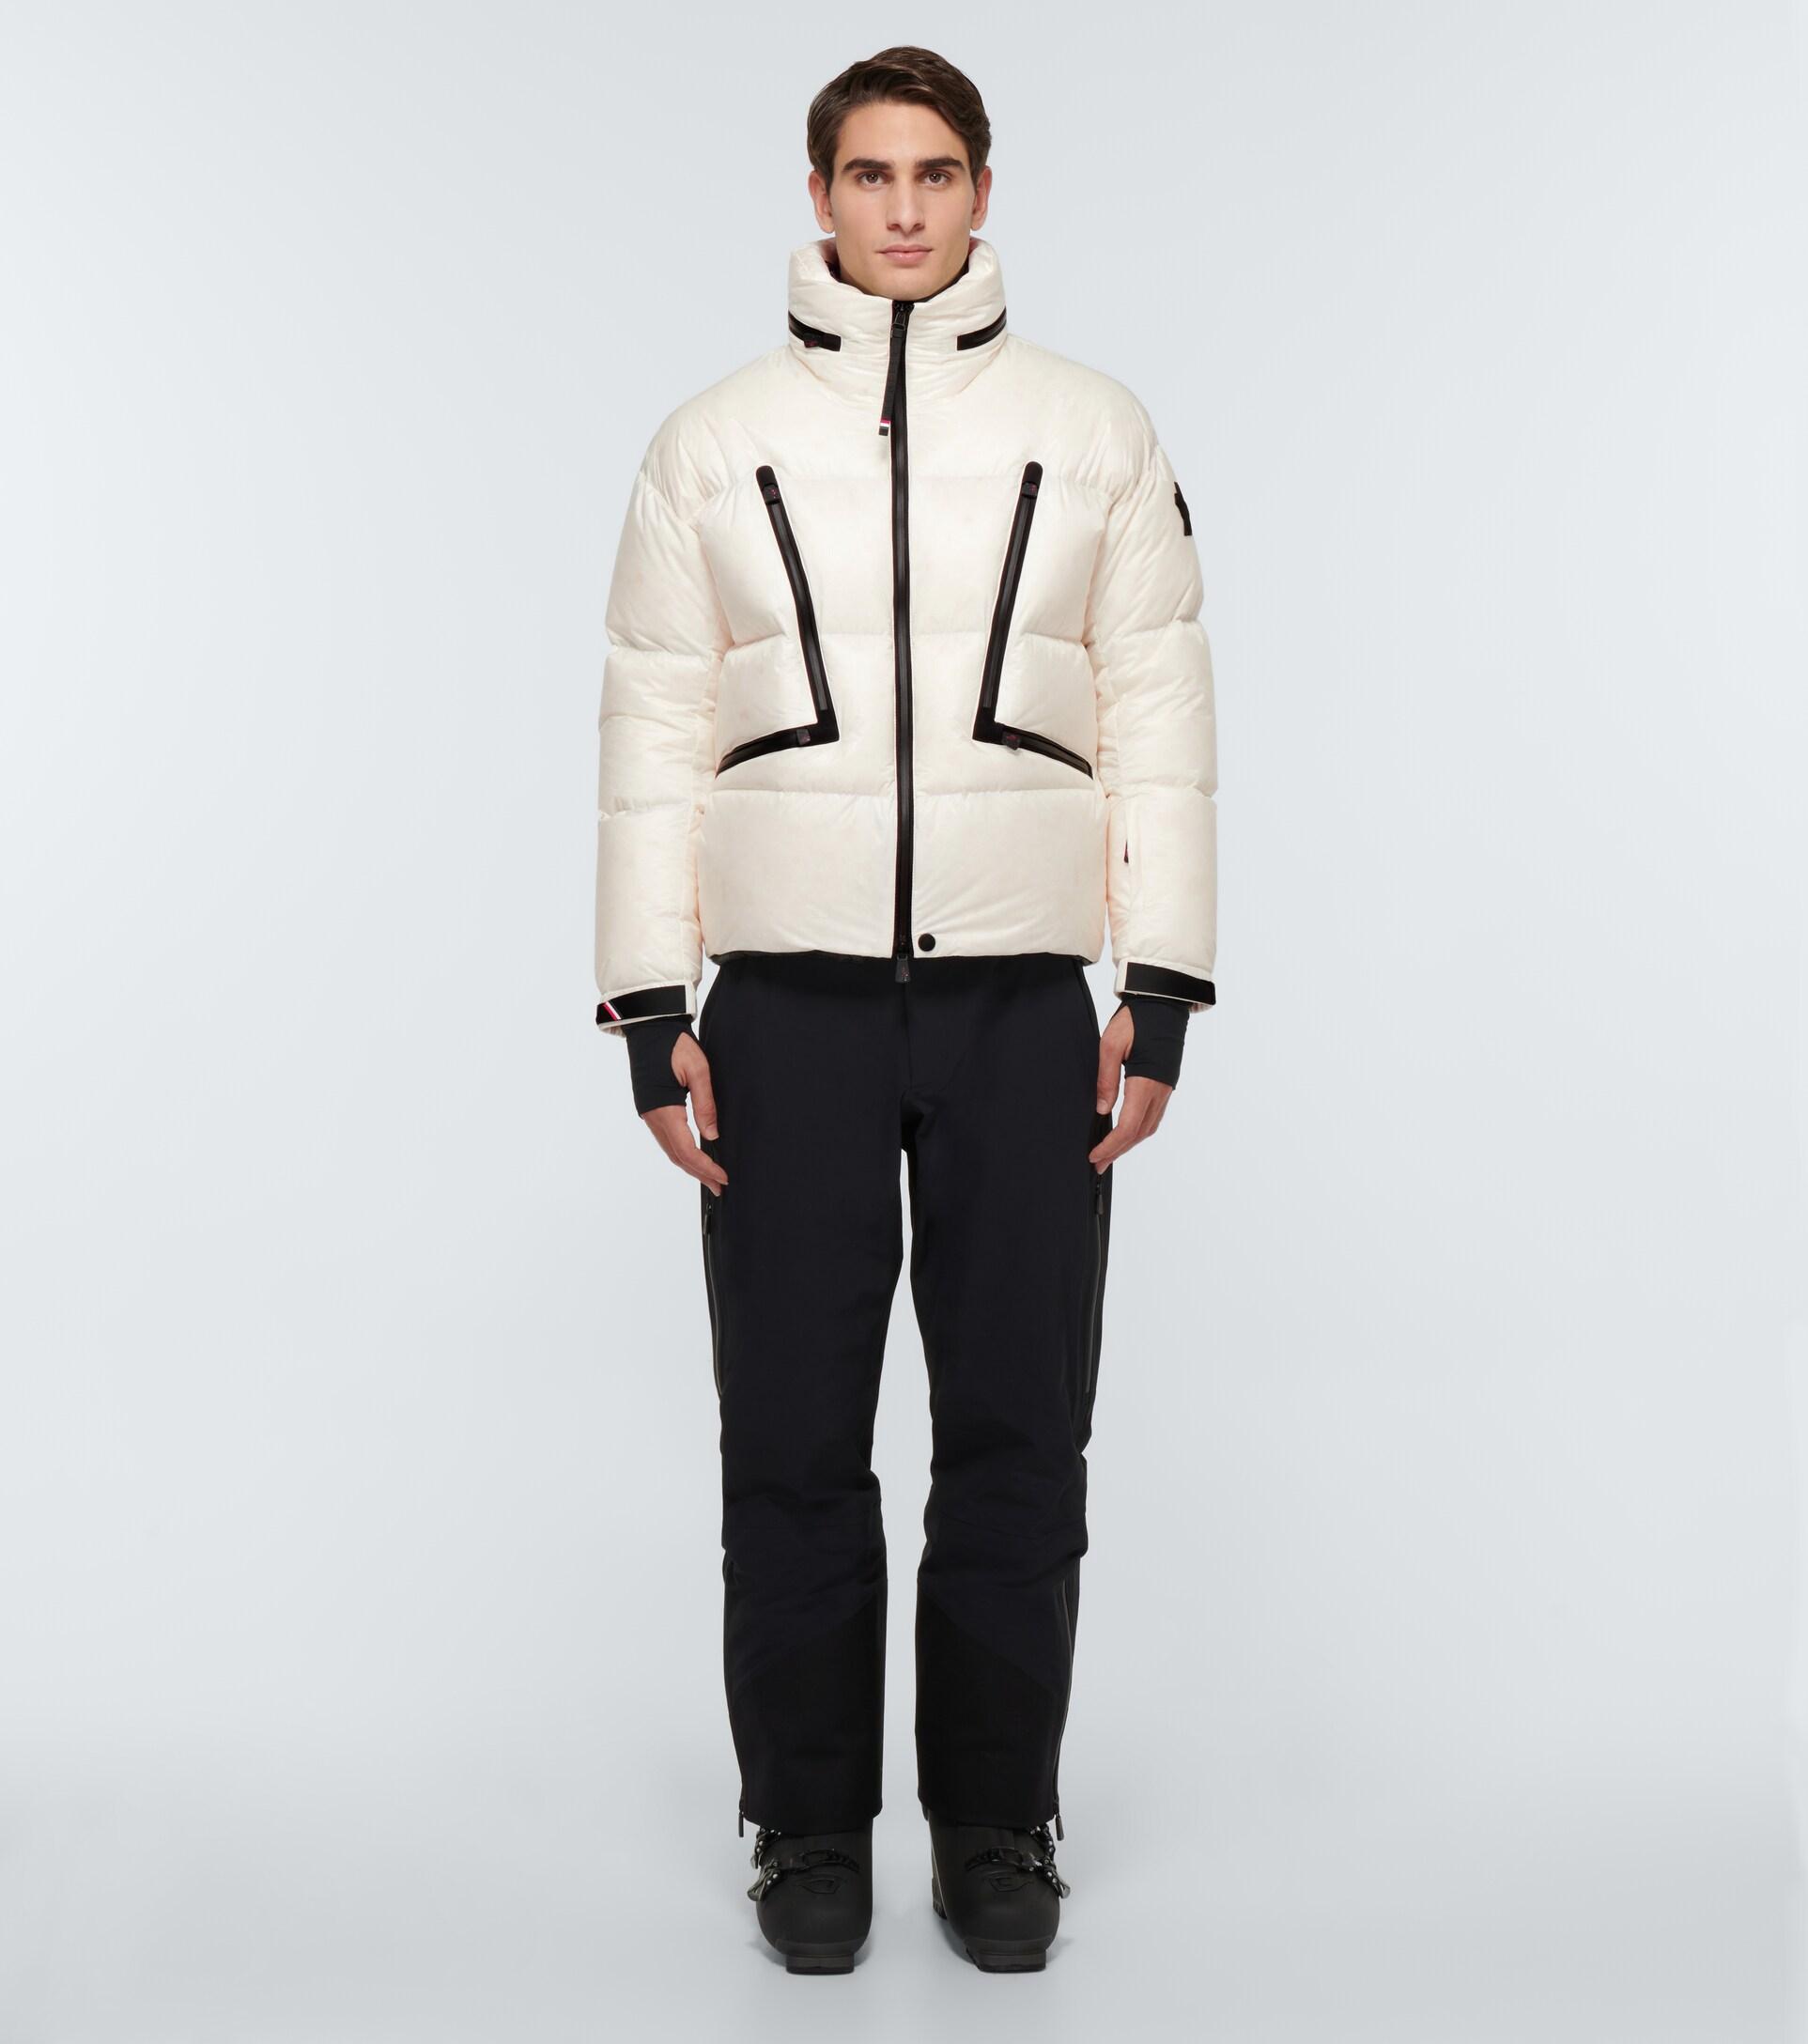 3 MONCLER GRENOBLE by Moncler Genius Croz Photo-Luminescent Jacket